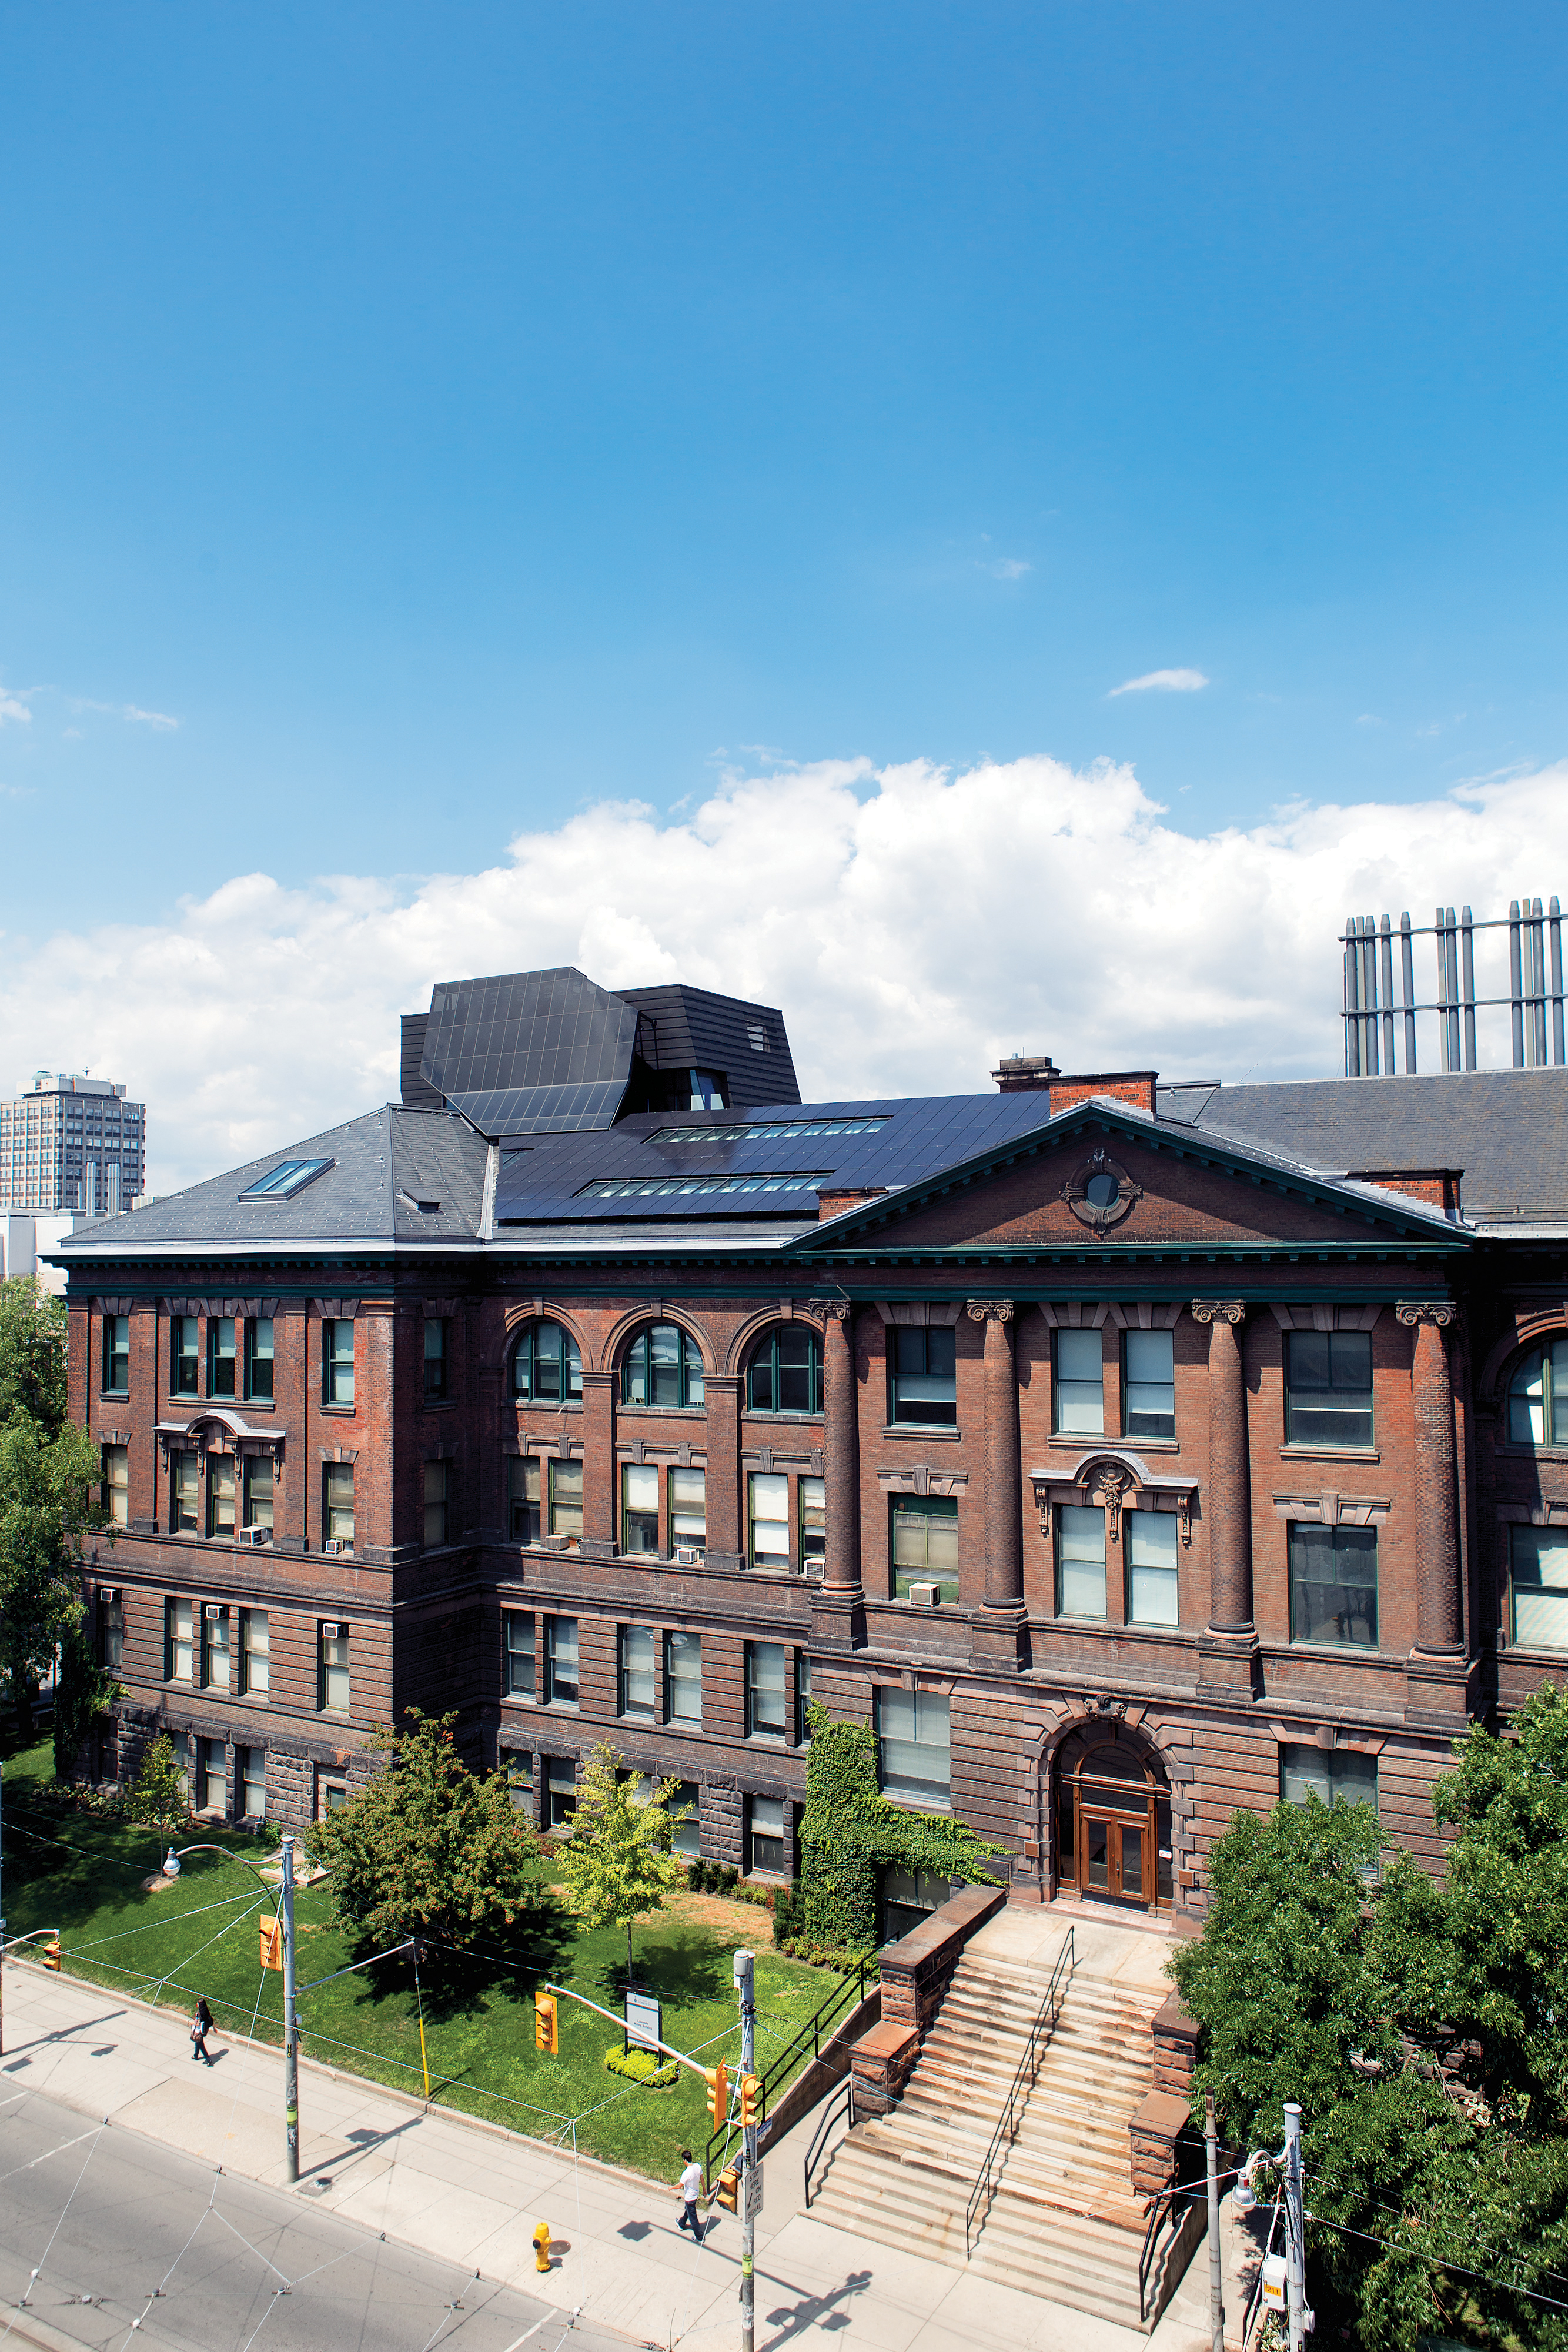 In November 2011, the University of Toronto celebrated the opening of the renovated Lassonde Mining Building. The transformation of the building, which first opened in 1904, converted the previously unused attic into new collaborative student design studios and teaching spaces and added a rooftop meeting room.